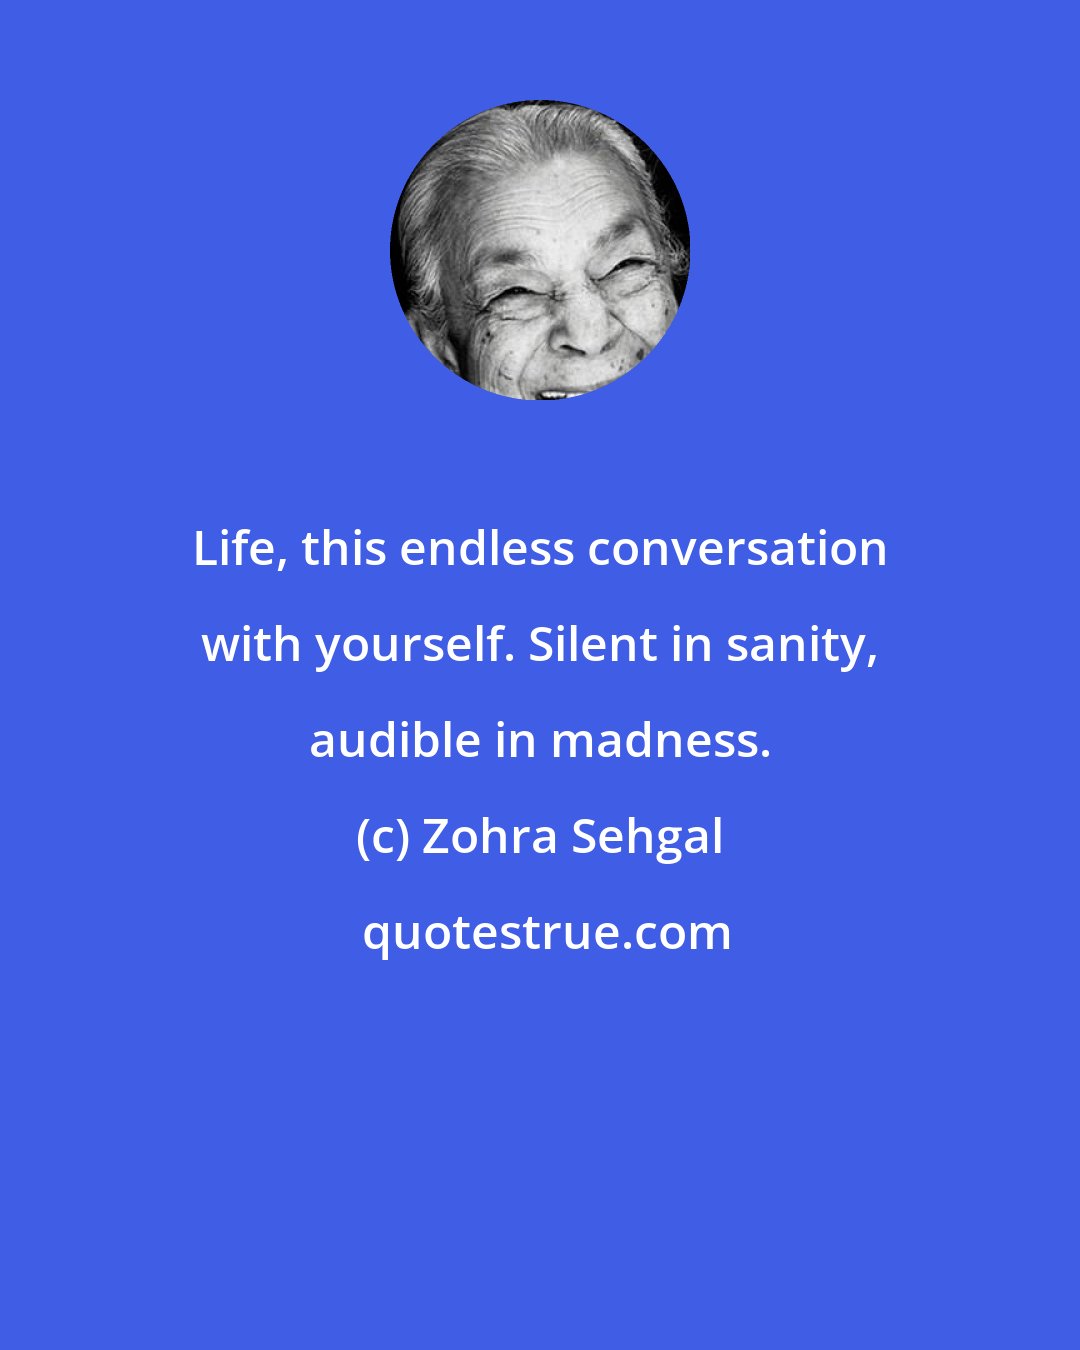 Zohra Sehgal: Life, this endless conversation with yourself. Silent in sanity, audible in madness.